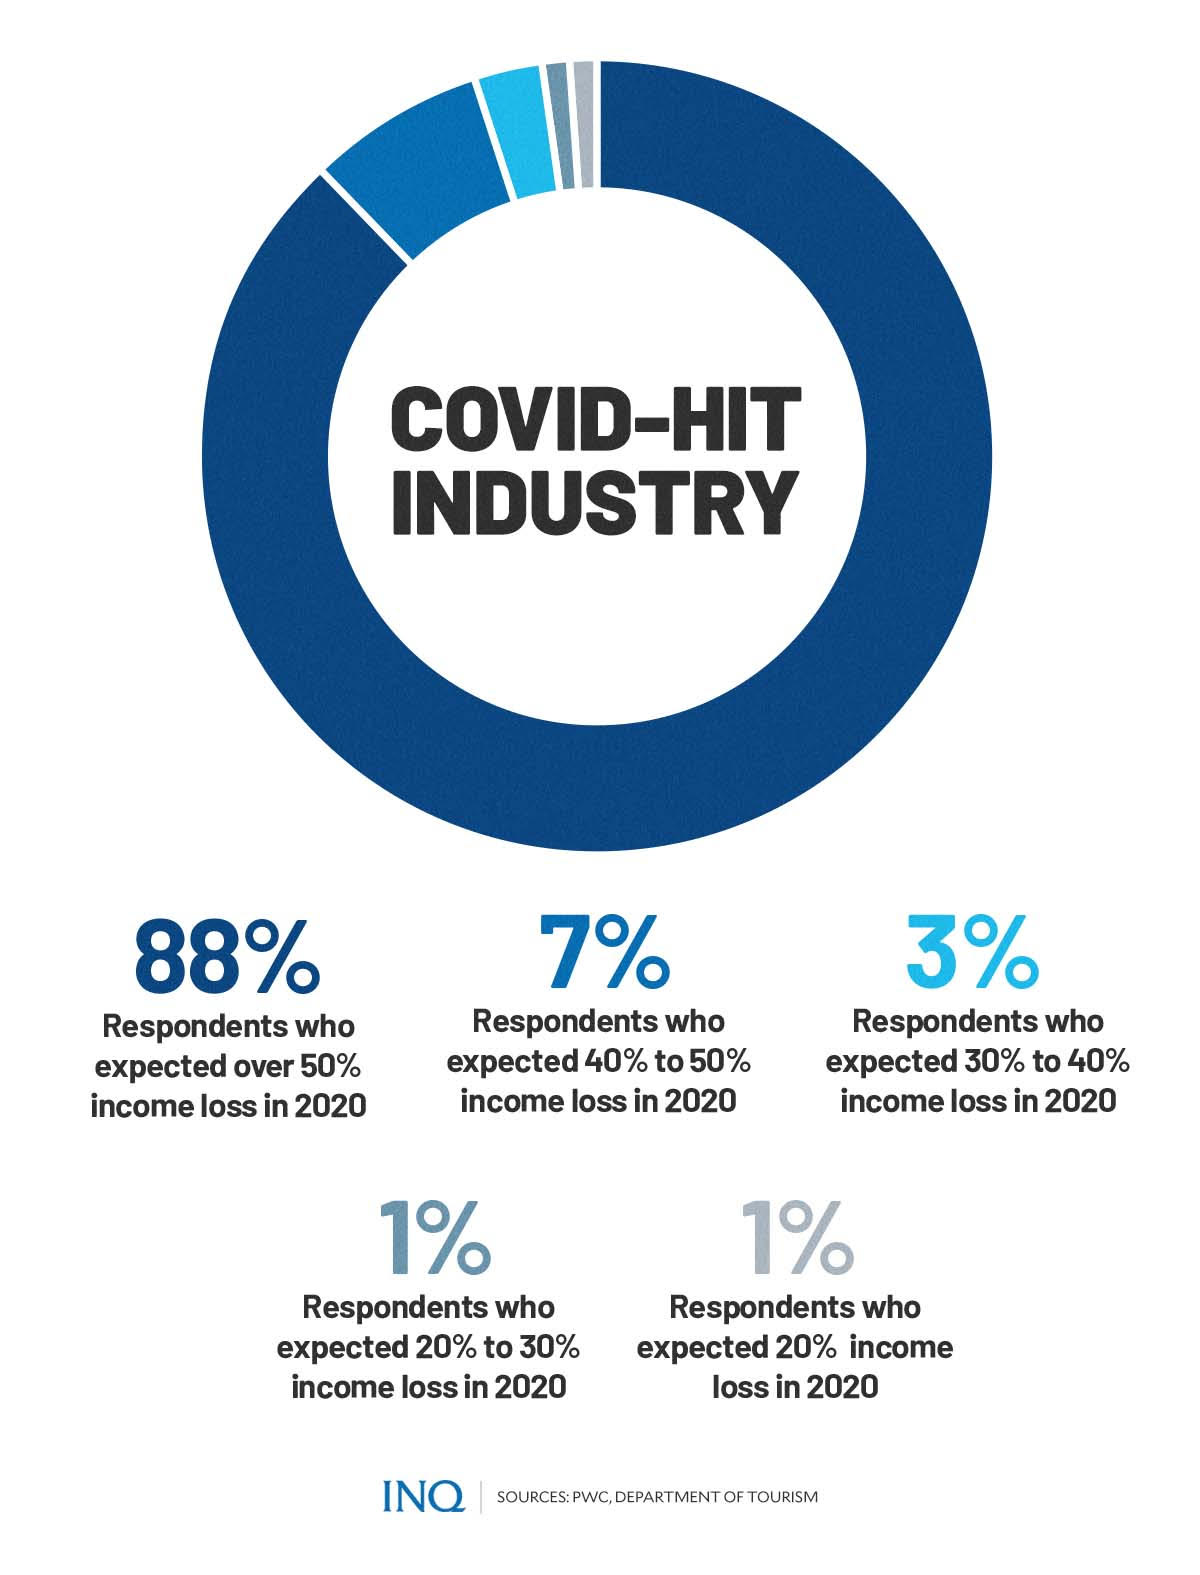 COVID hit industry